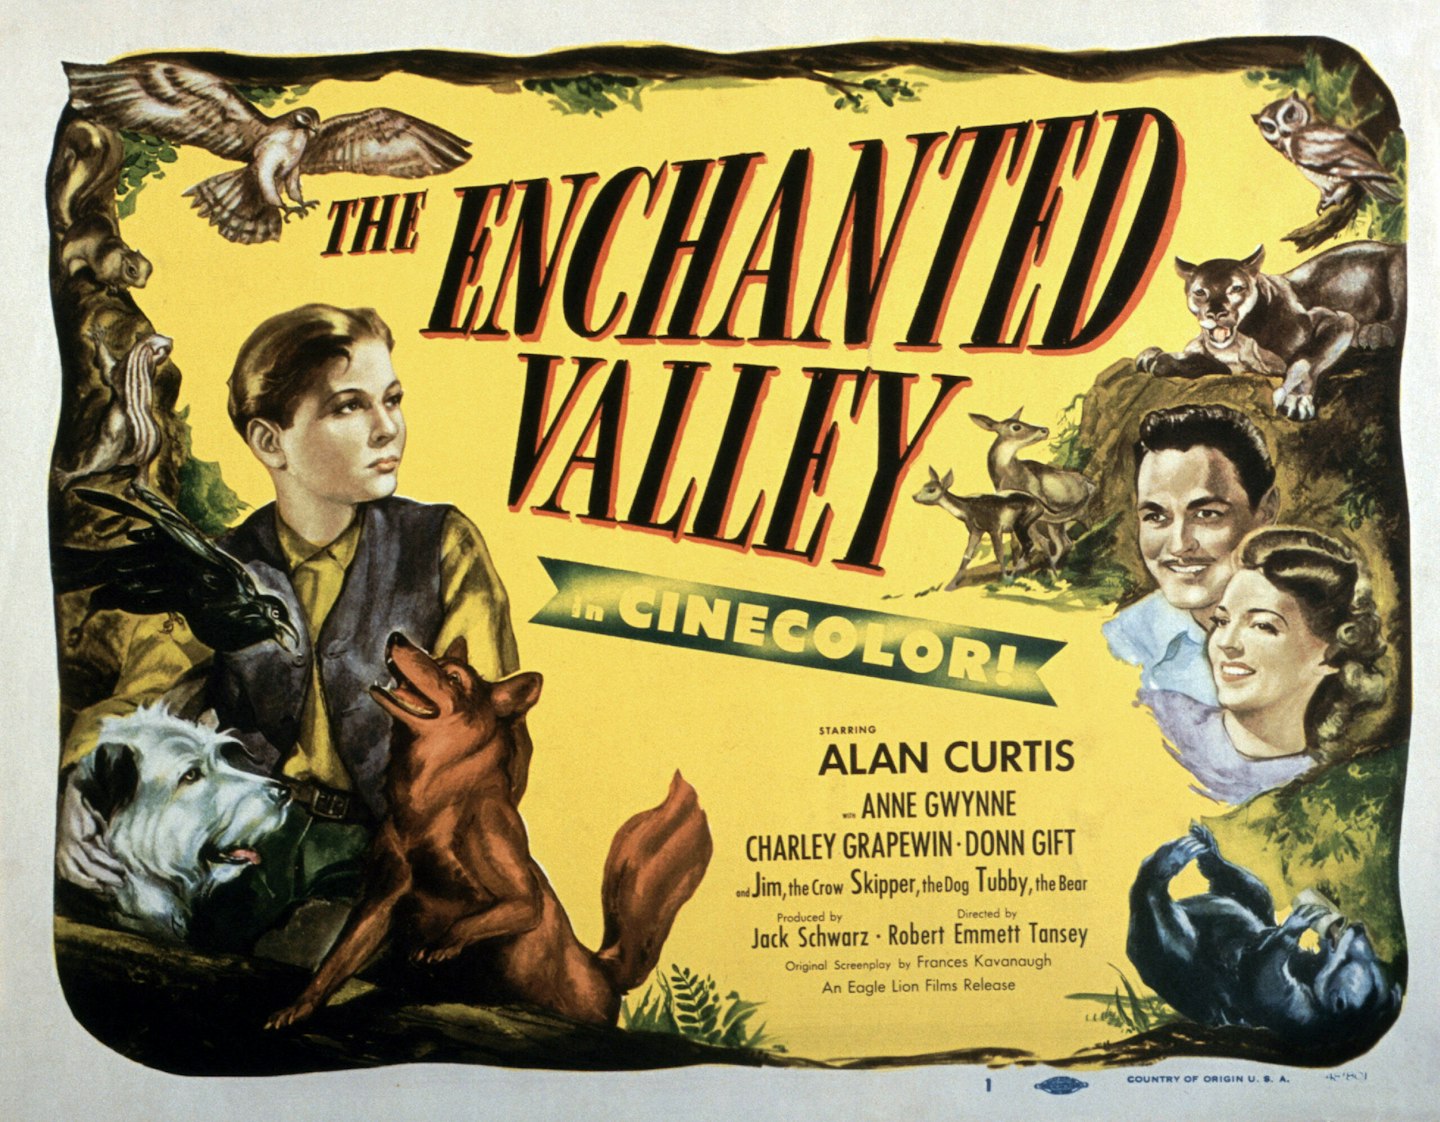 The Enchanted Valley film poster